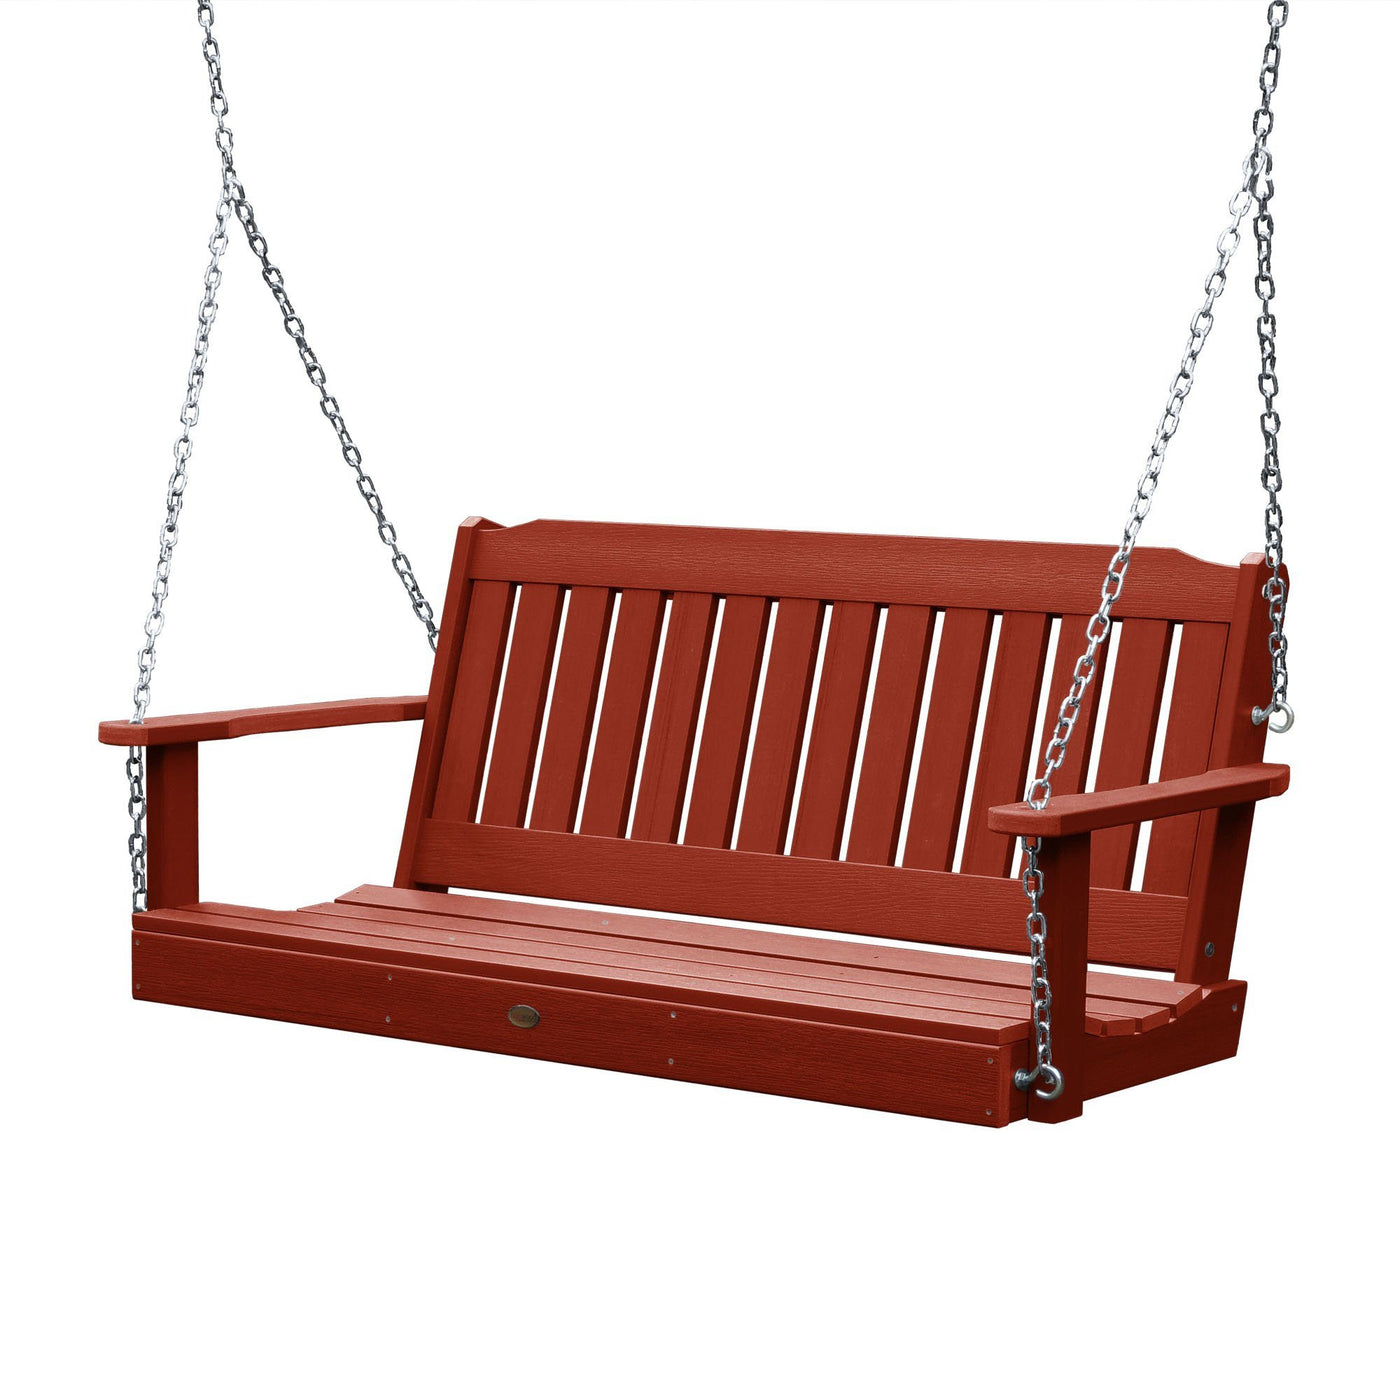 Lehigh Porch Swing - 5ft BenchSwing Highwood USA Rustic Red 